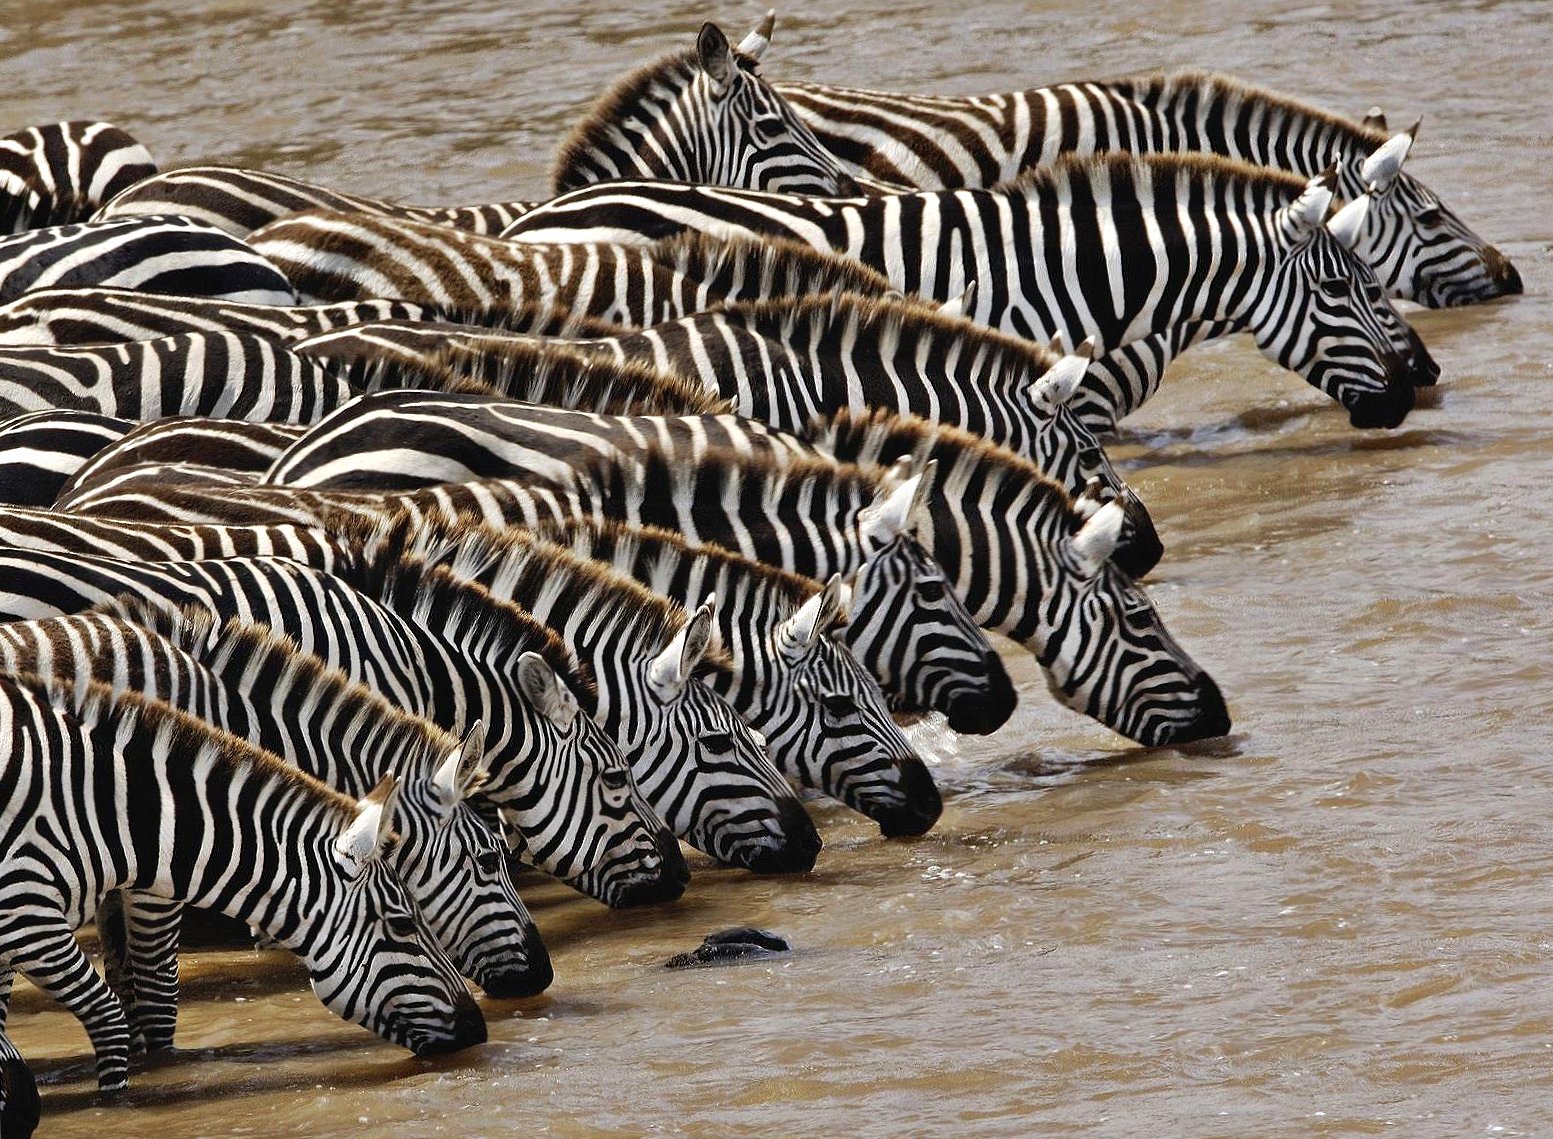 Drinking zebras wallpapers HD quality